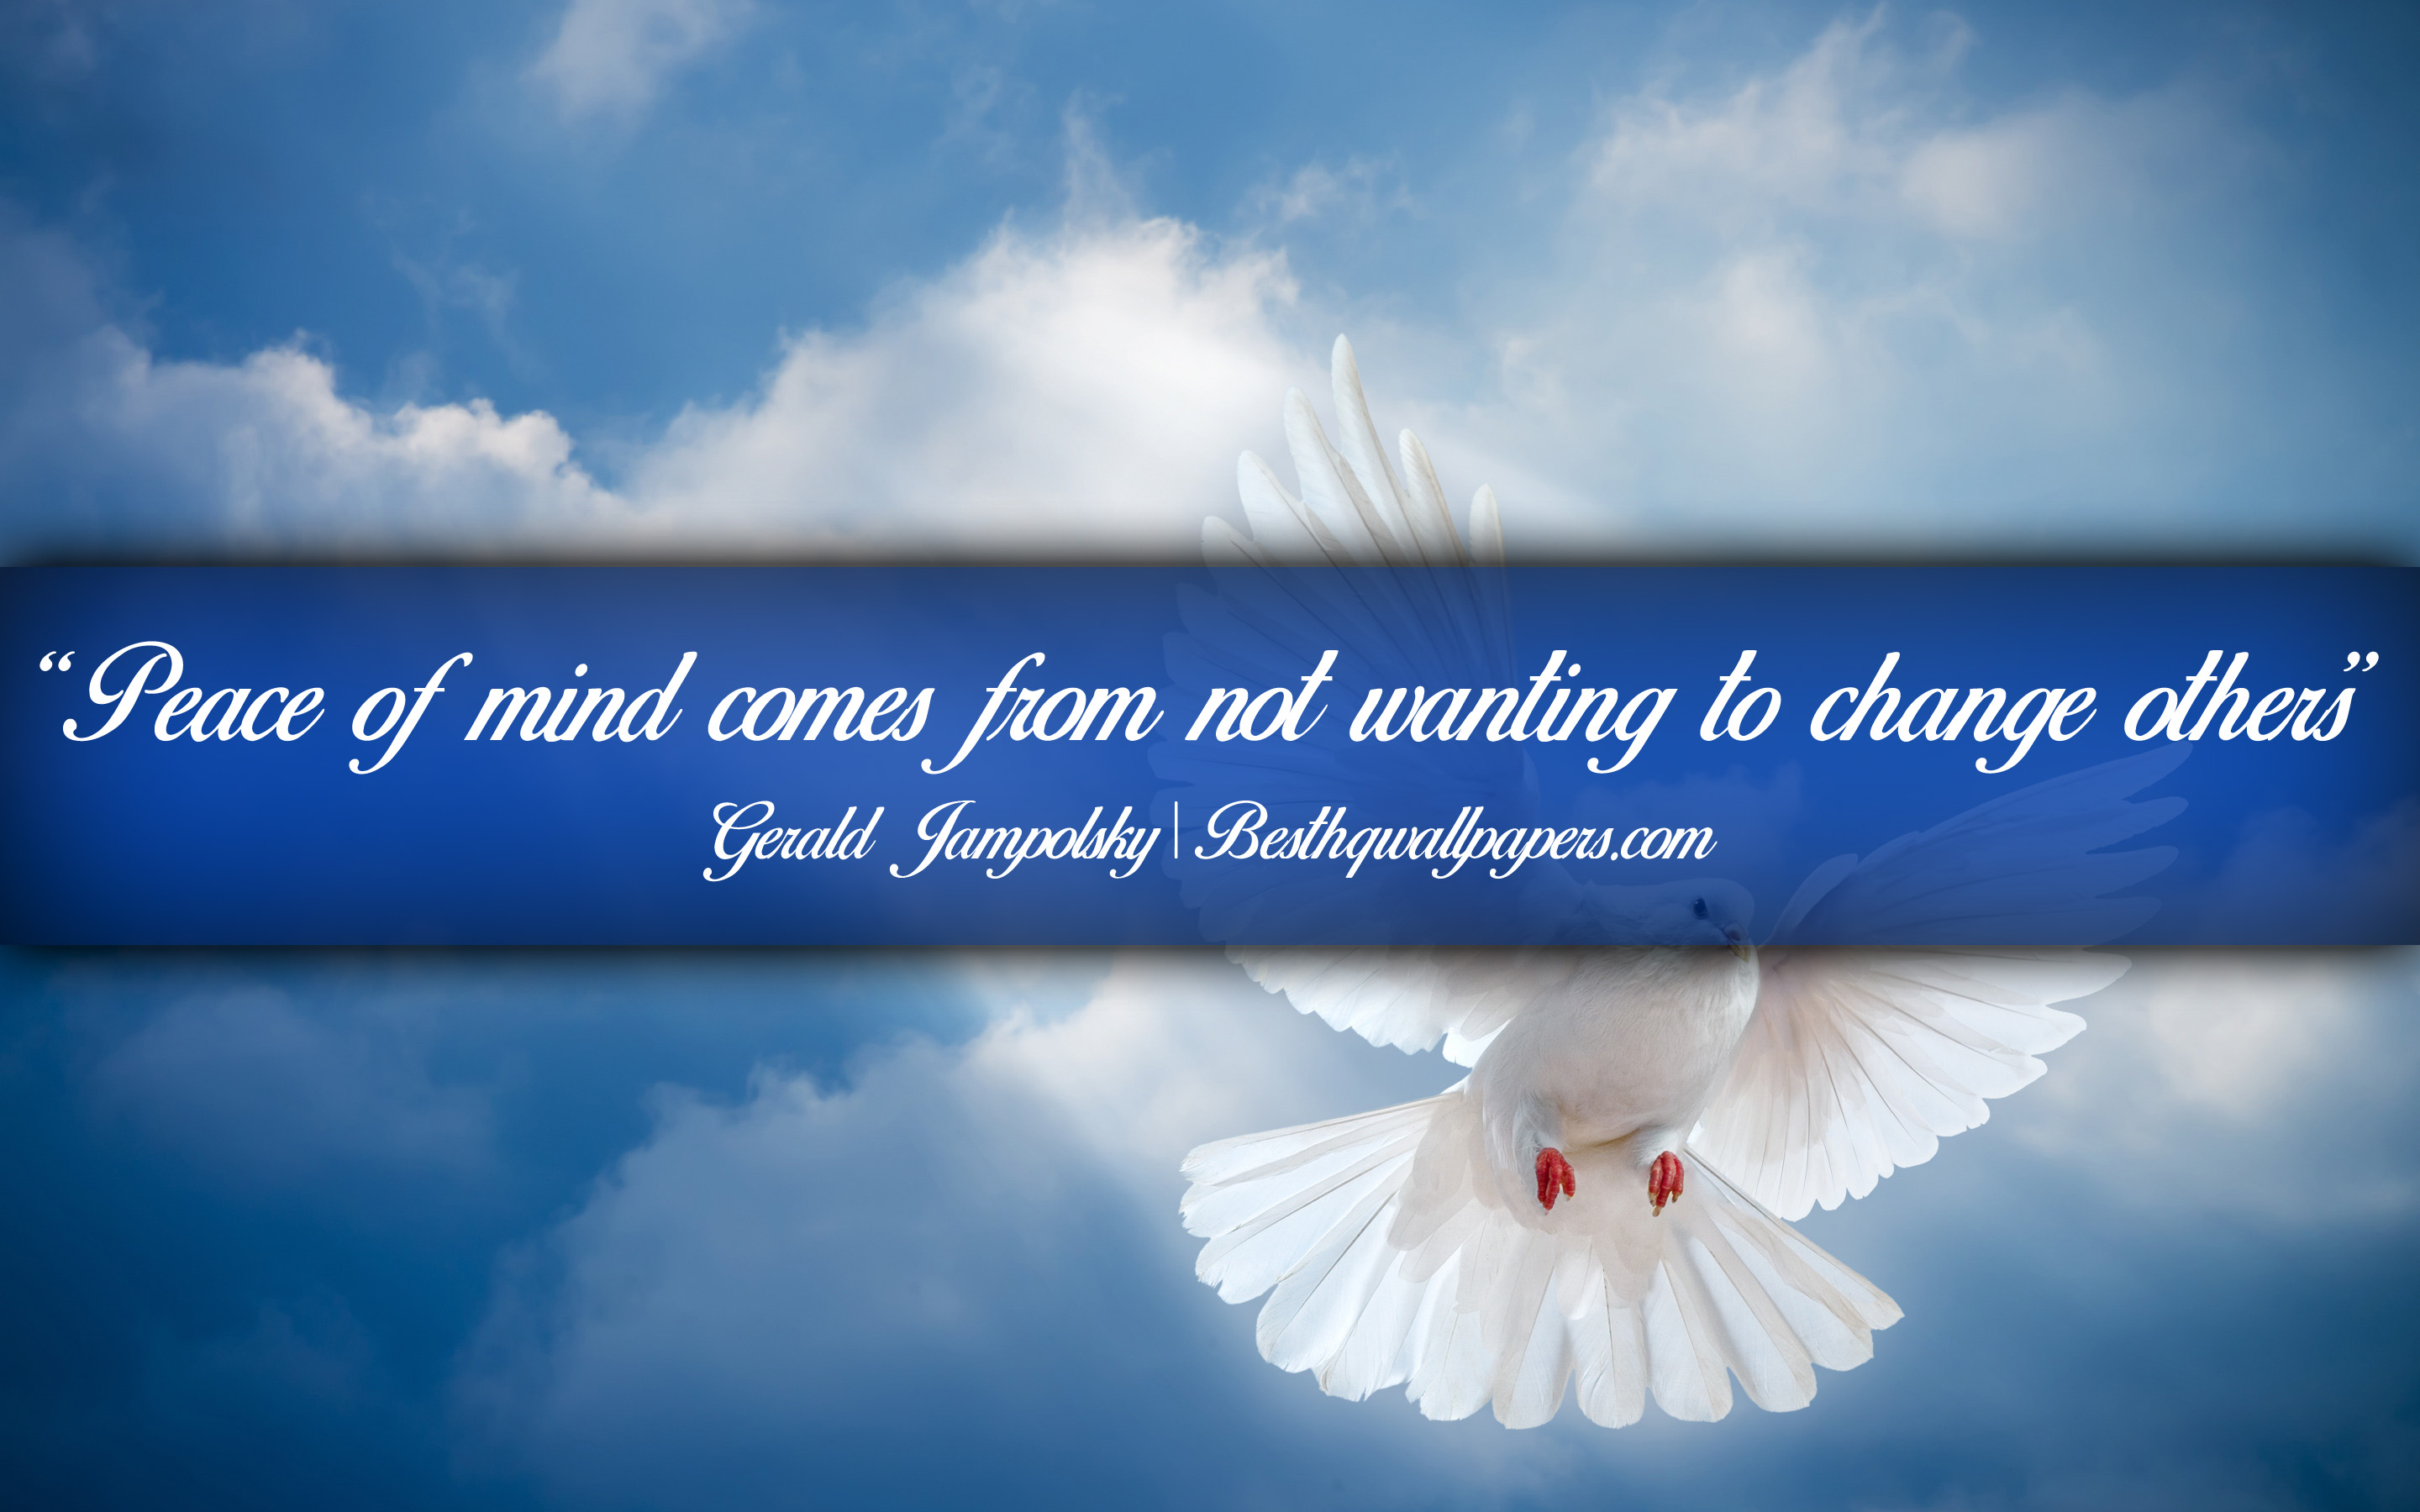 Peace Of Mind Comes From Not Wanting To Change Others, - Flight - 2880x1800  Wallpaper 